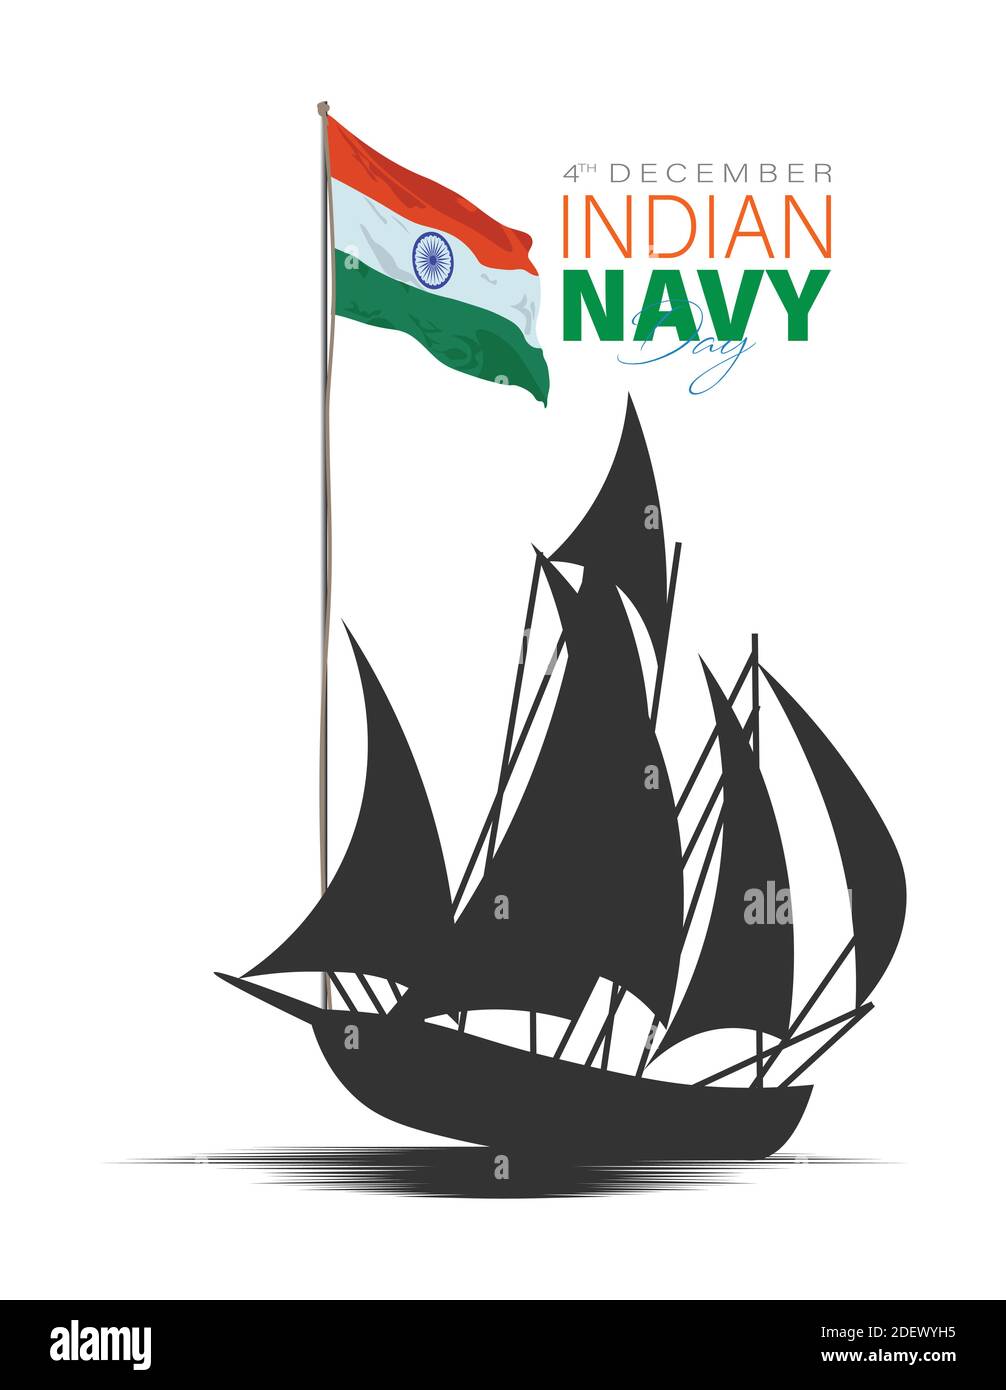 Vector Illustration of Indian Navy Day. December 4. We salute Indian Navy on the occasion of naval day. Stock Vector